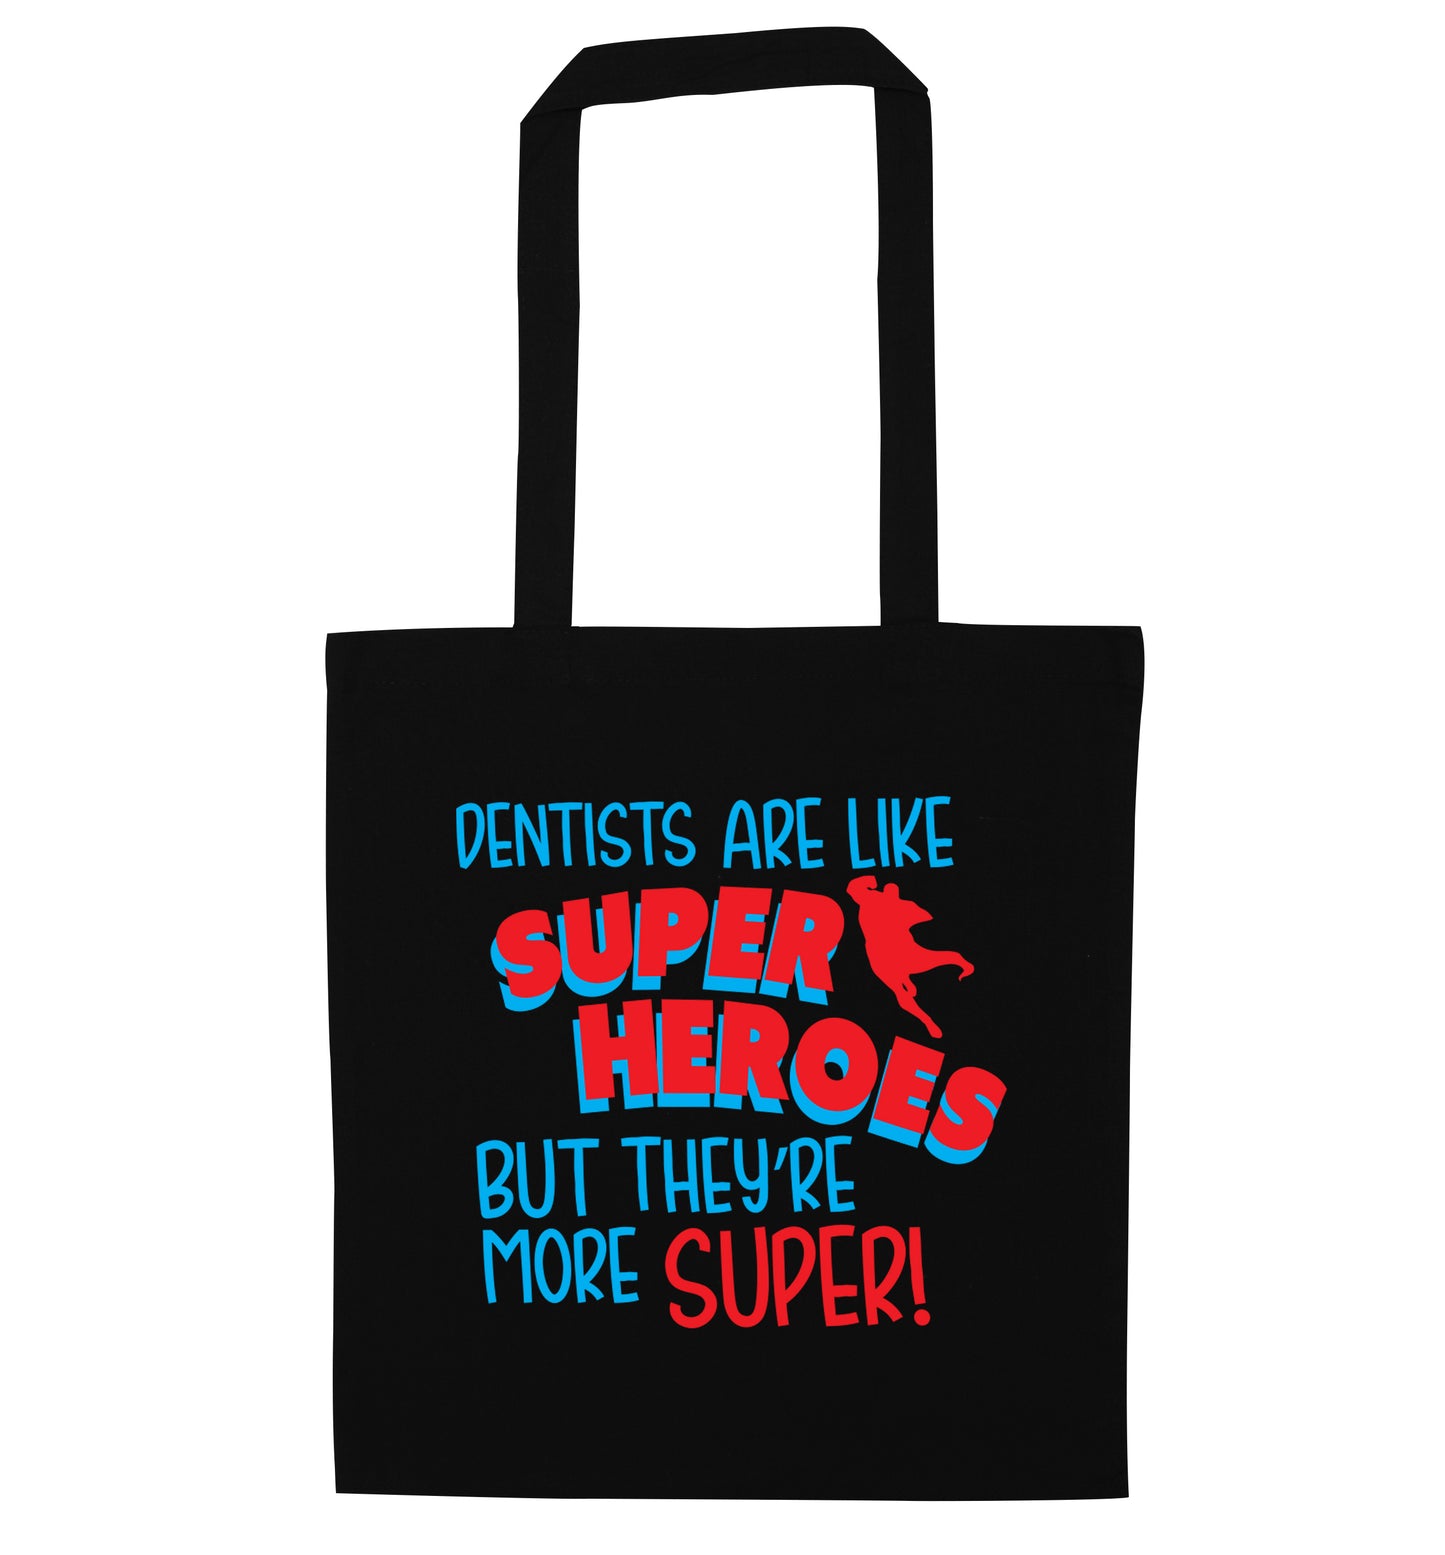 Dentists are like superheros but they're more super black tote bag